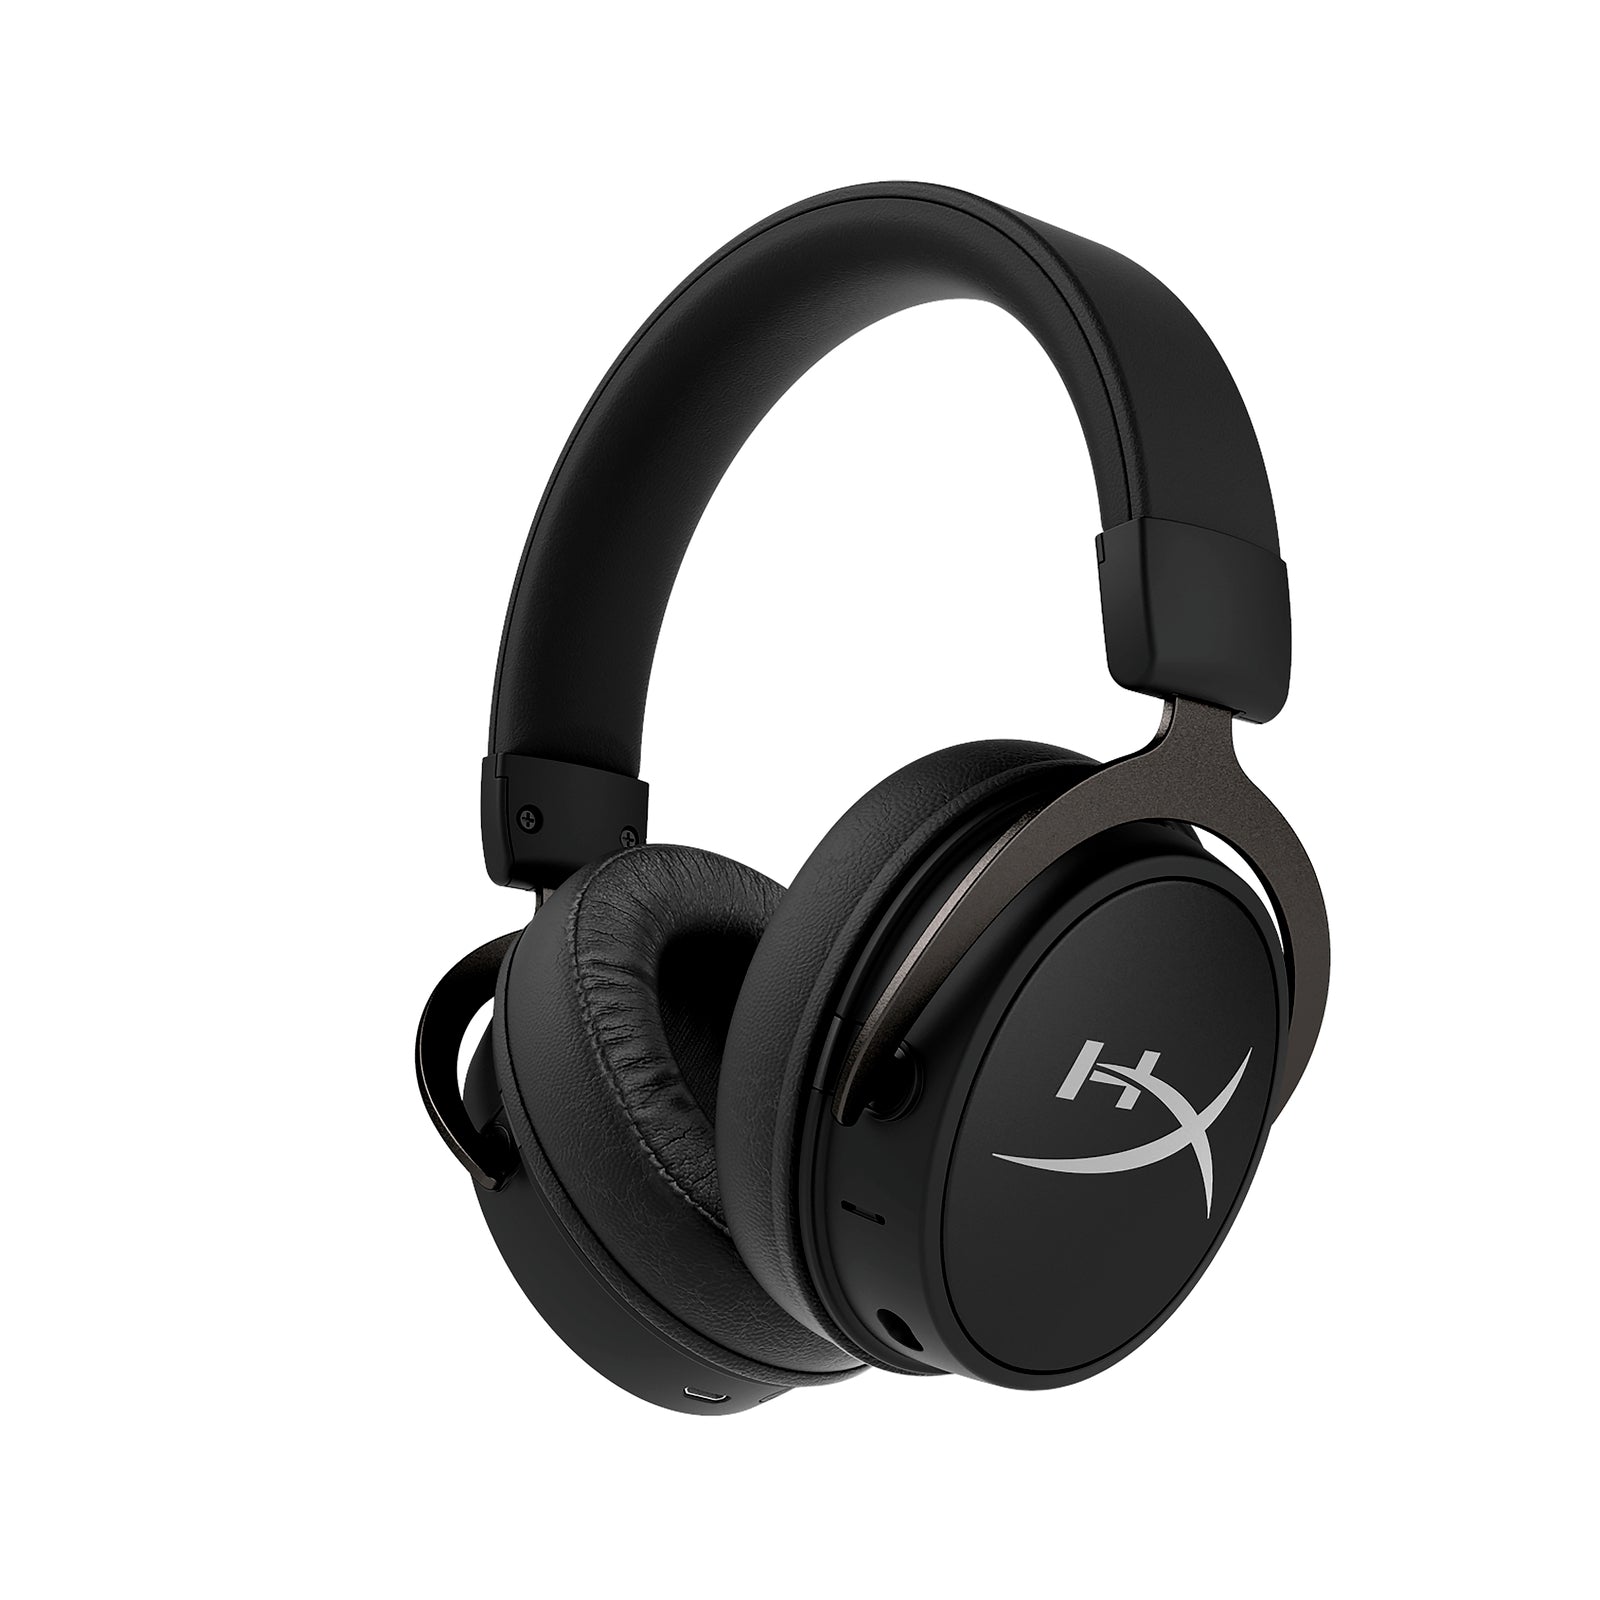 Cloud MIX – and Headset Bluetooth Headphones ROW Wired | Gaming HyperX HyperX –